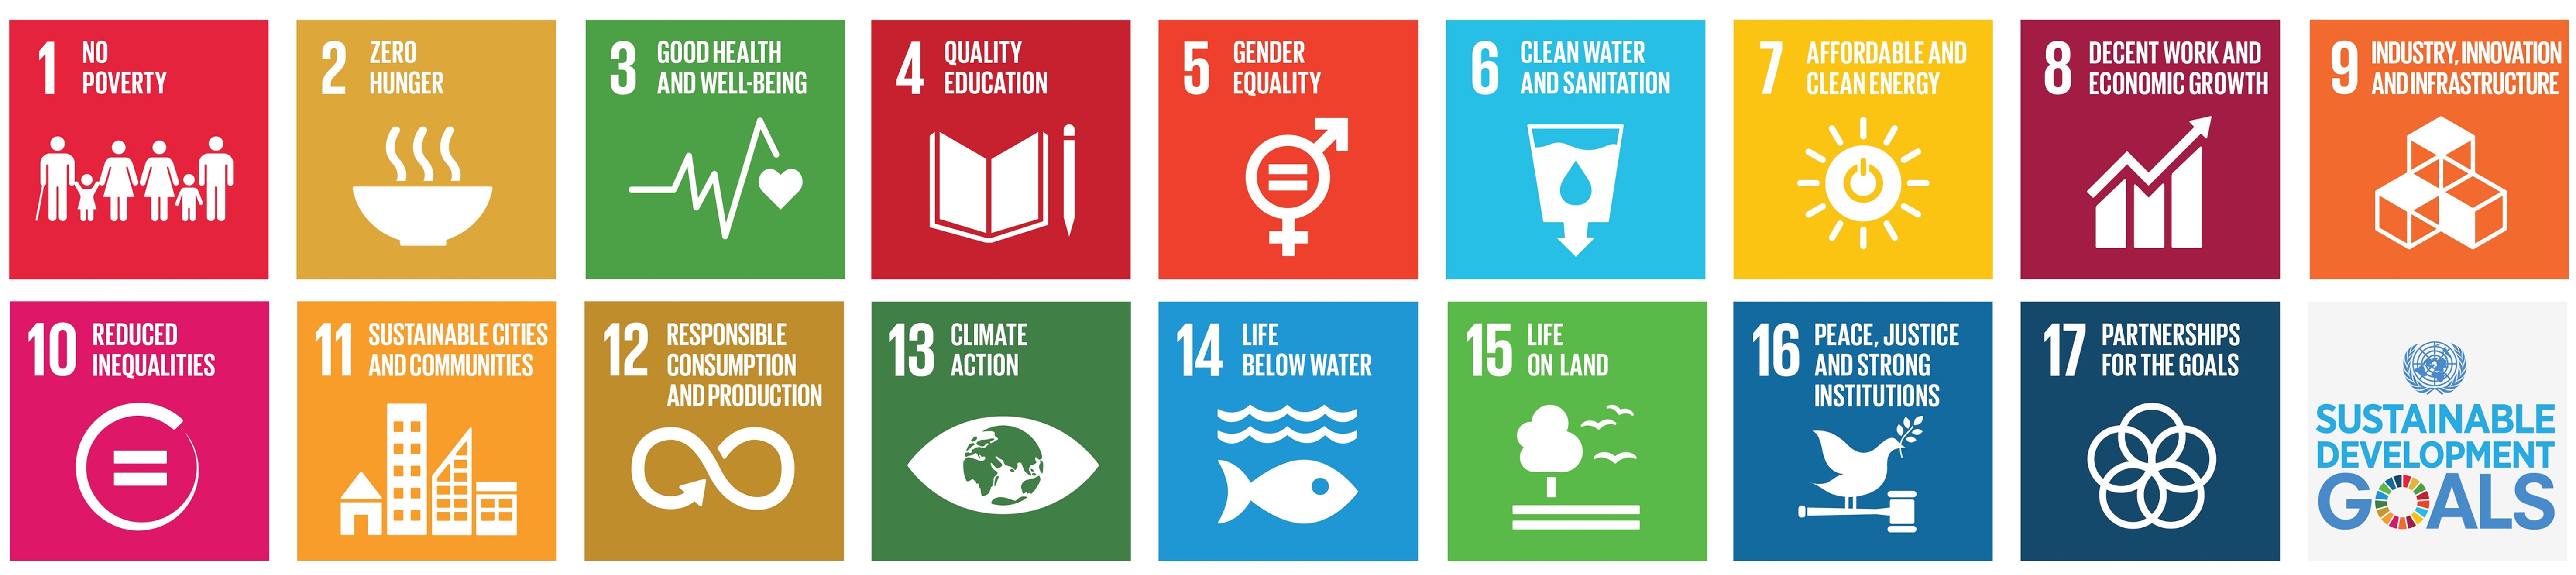 SDG icons and logo